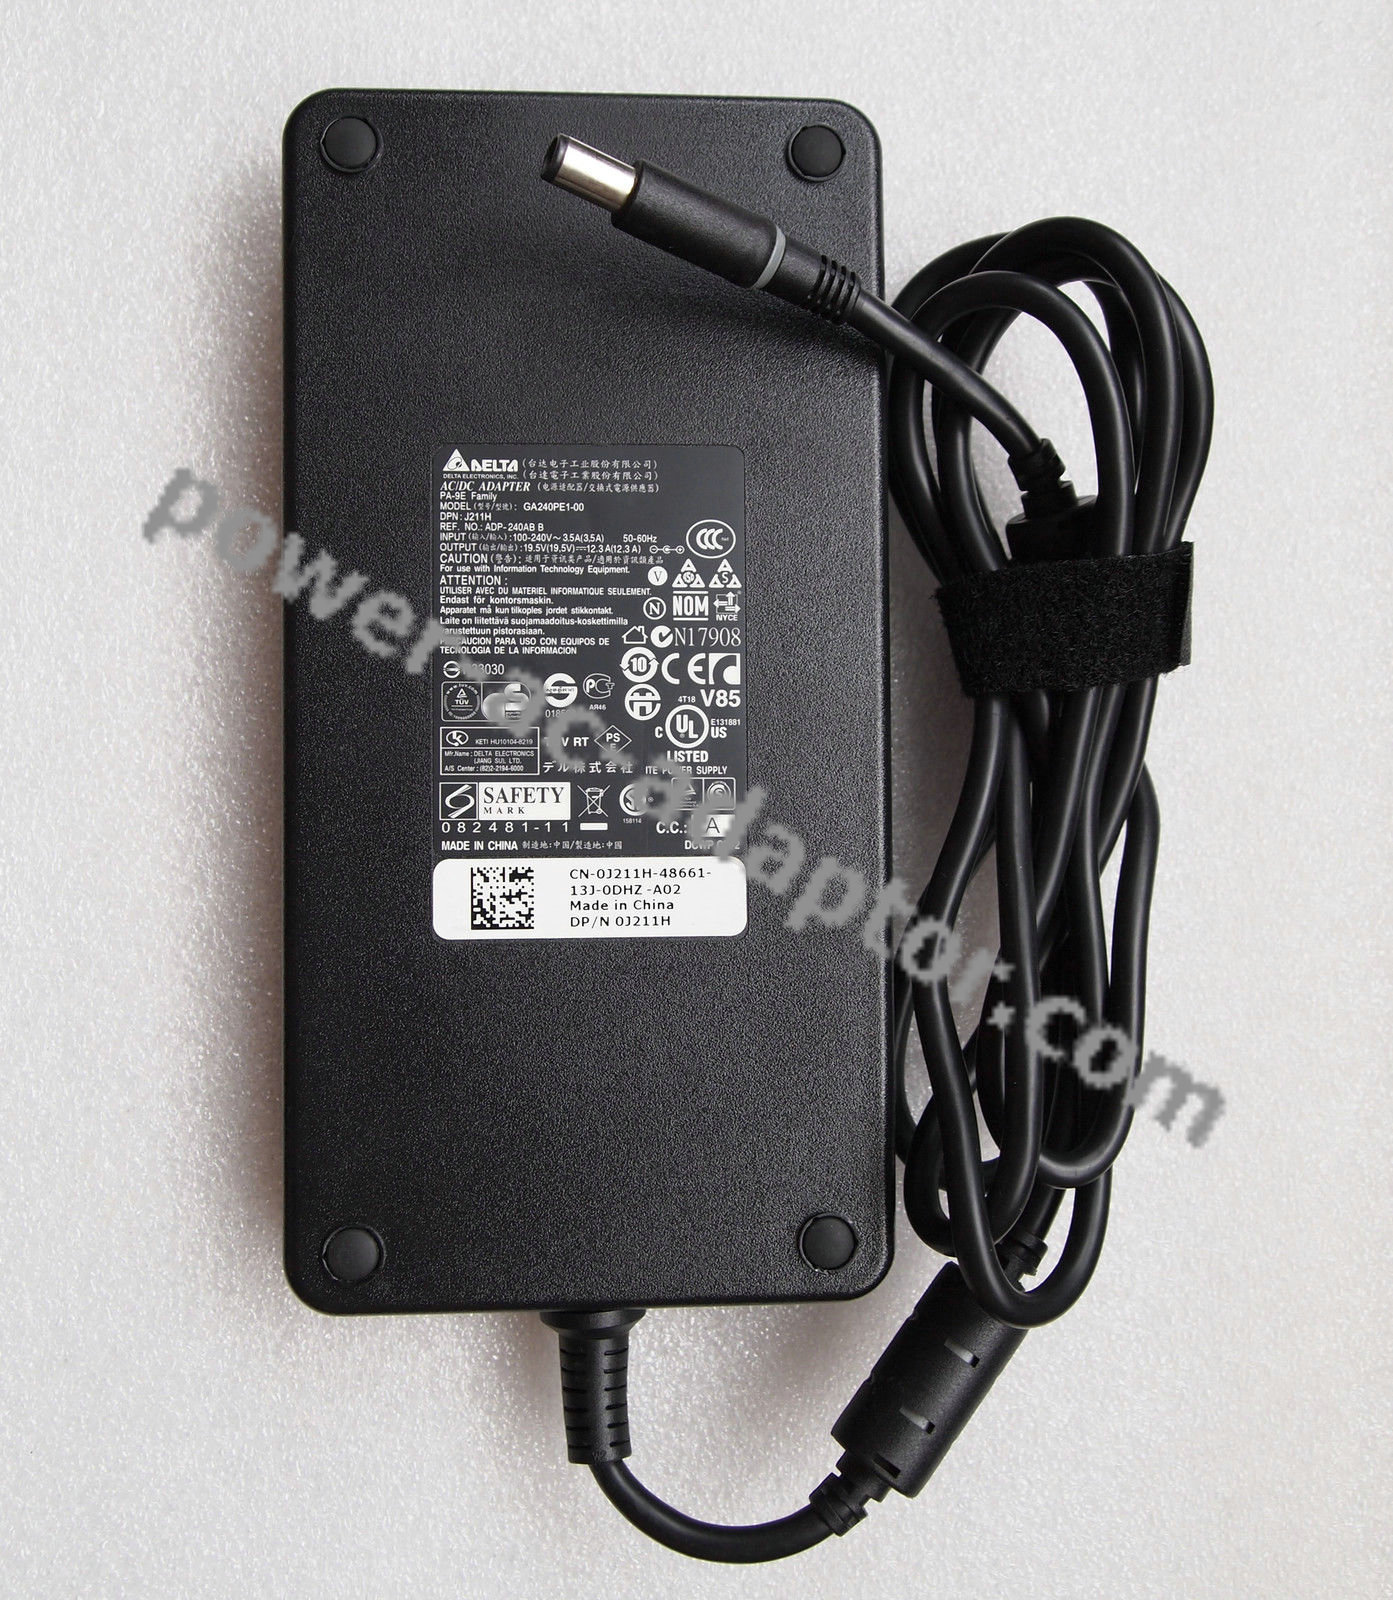 240W Original Dell Alienware M17x R3 AC Power Adapter Charger